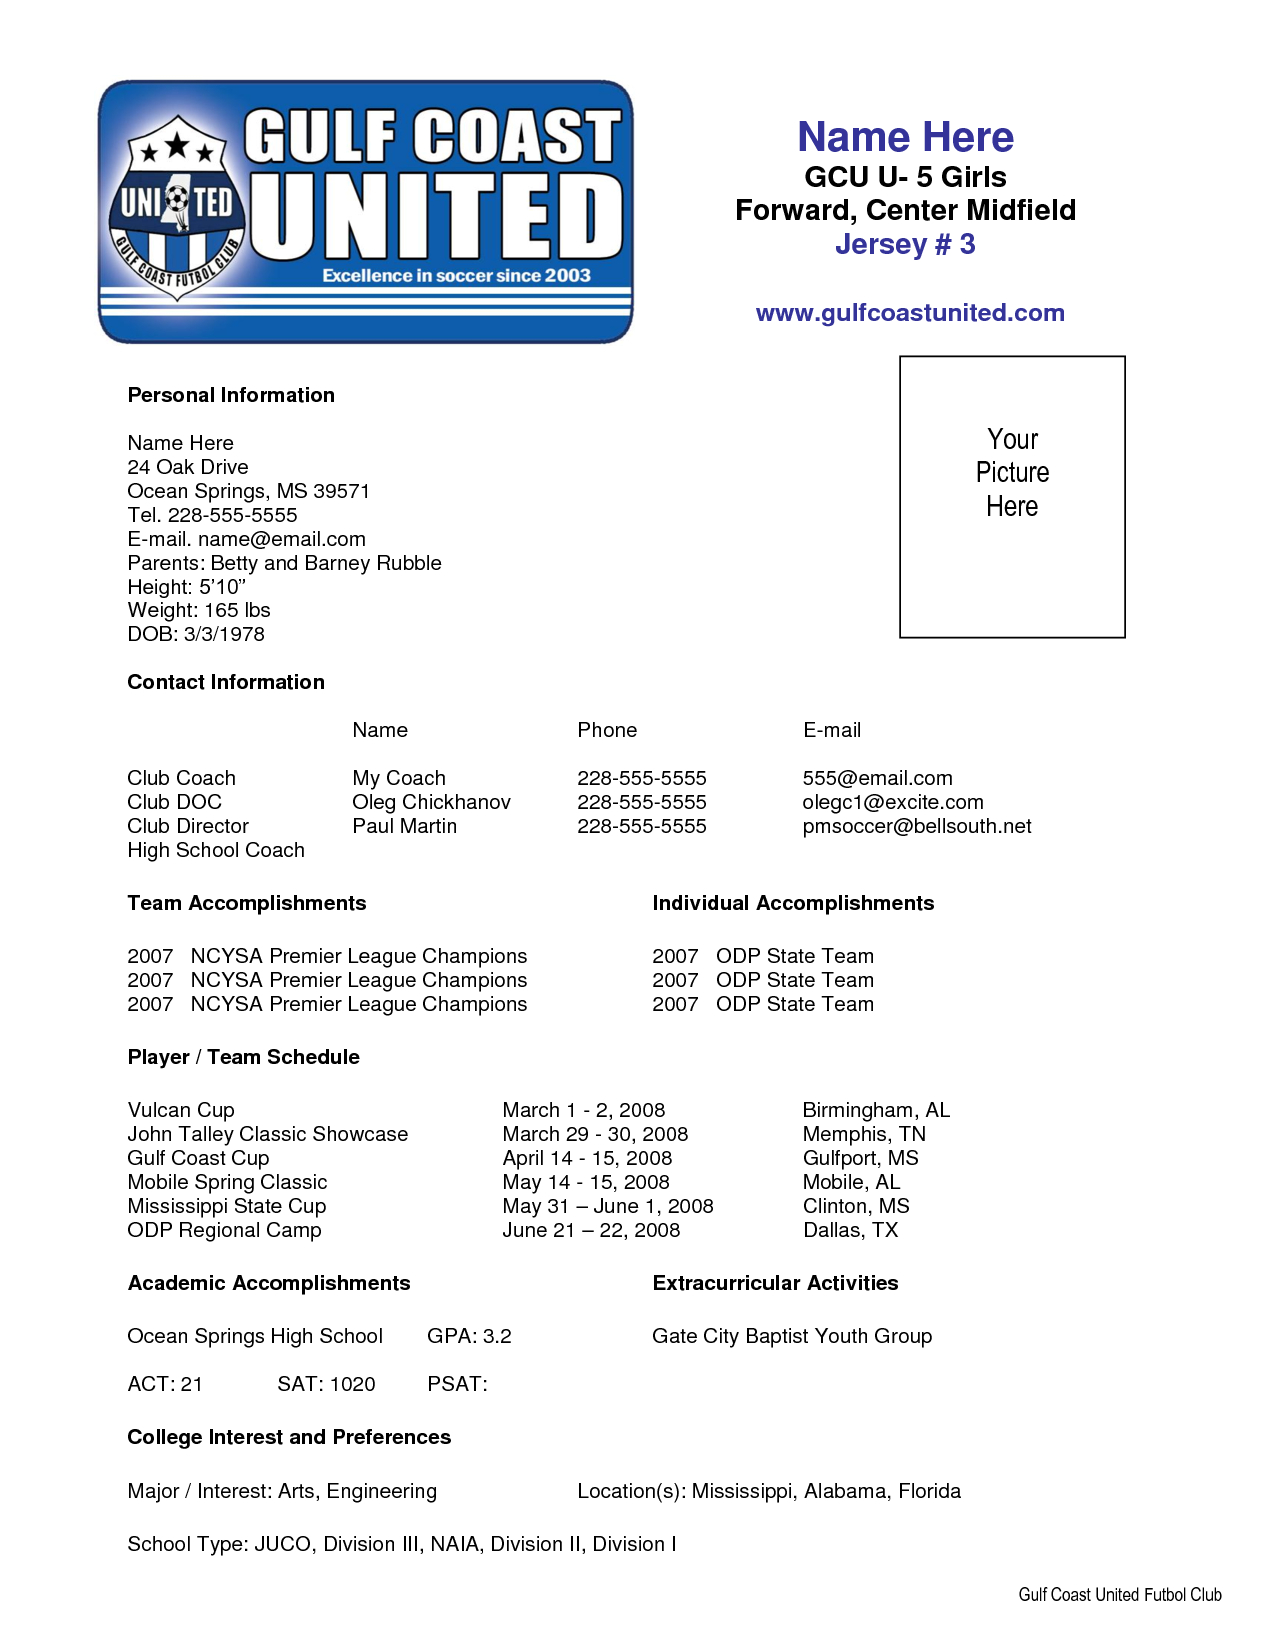 Sample Soccer Resume Coaching Business Best Resume Template in size 1275 X 1650